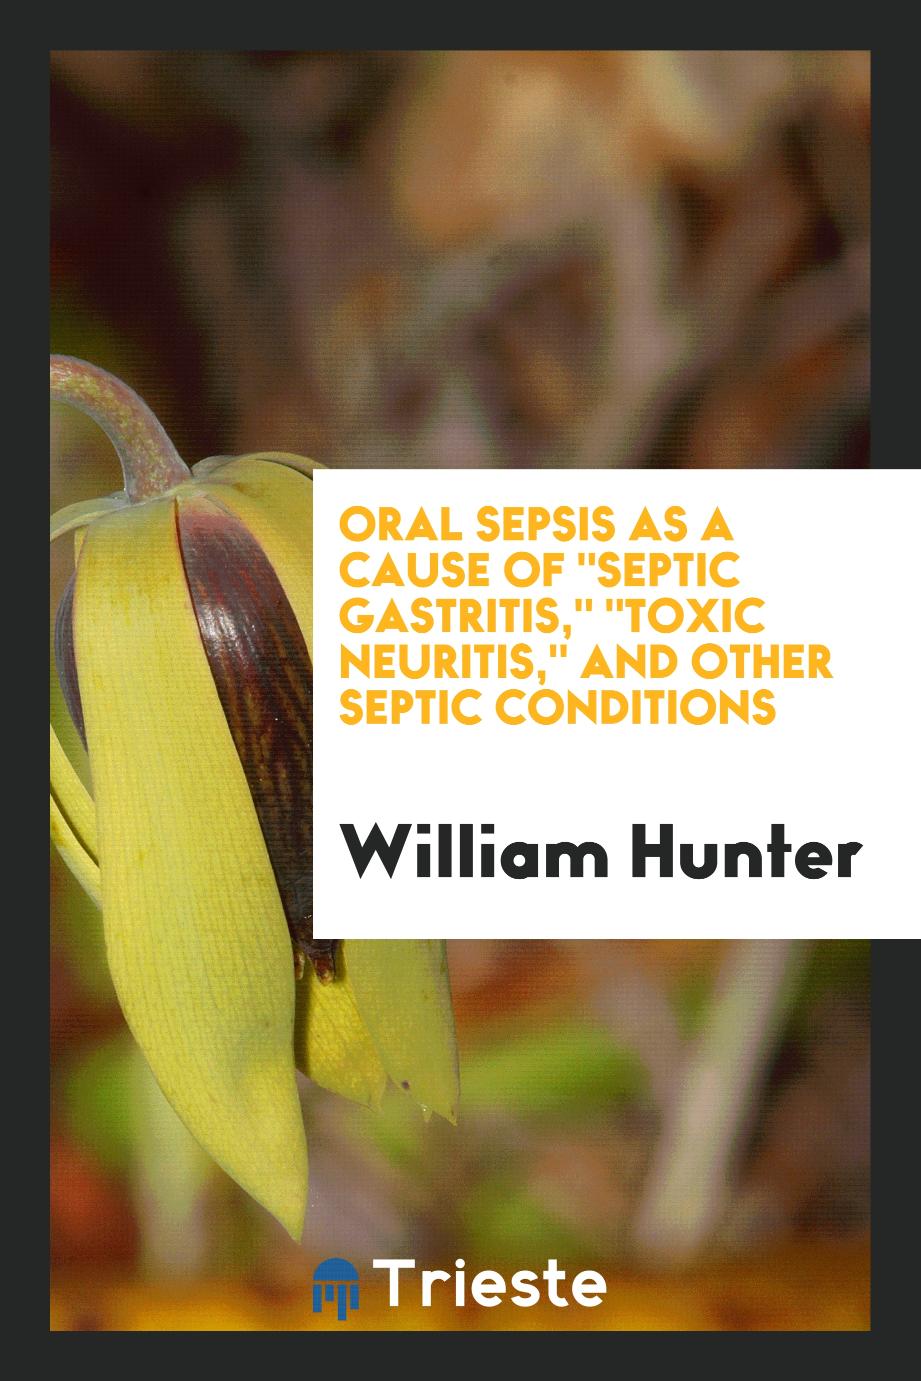 Oral Sepsis as a Cause of "septic Gastritis," "toxic Neuritis," and Other septic conditions